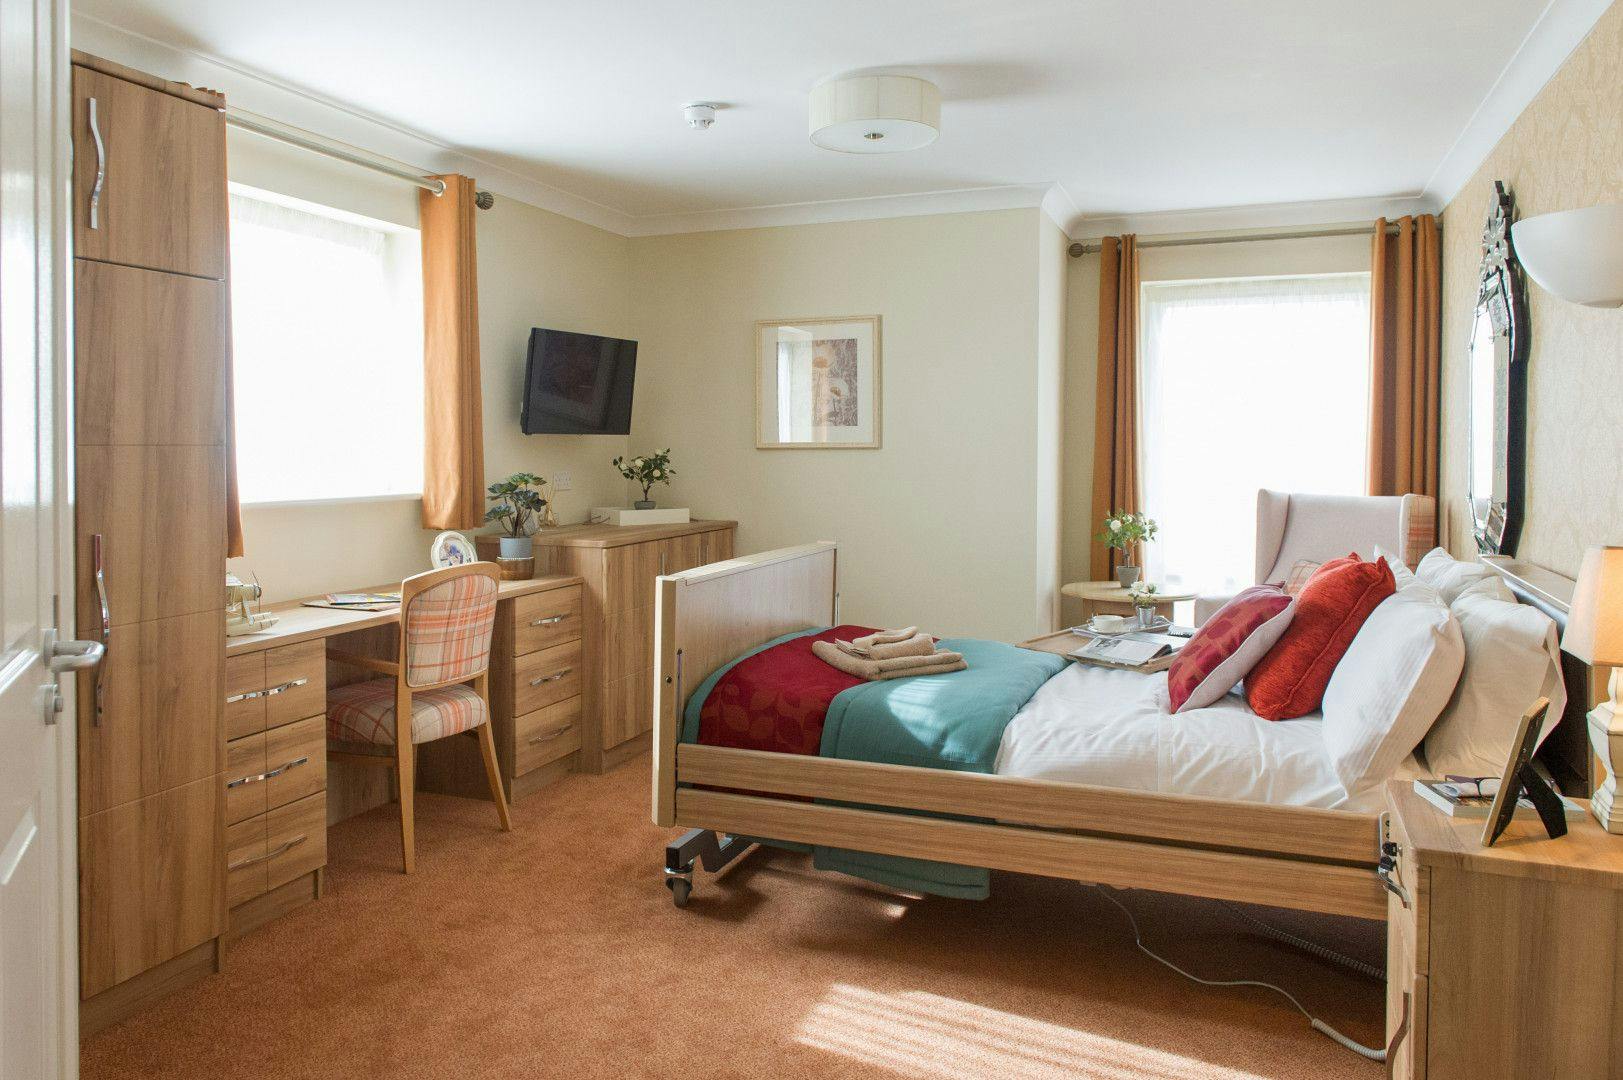 Care UK - Weald Heights care home 3